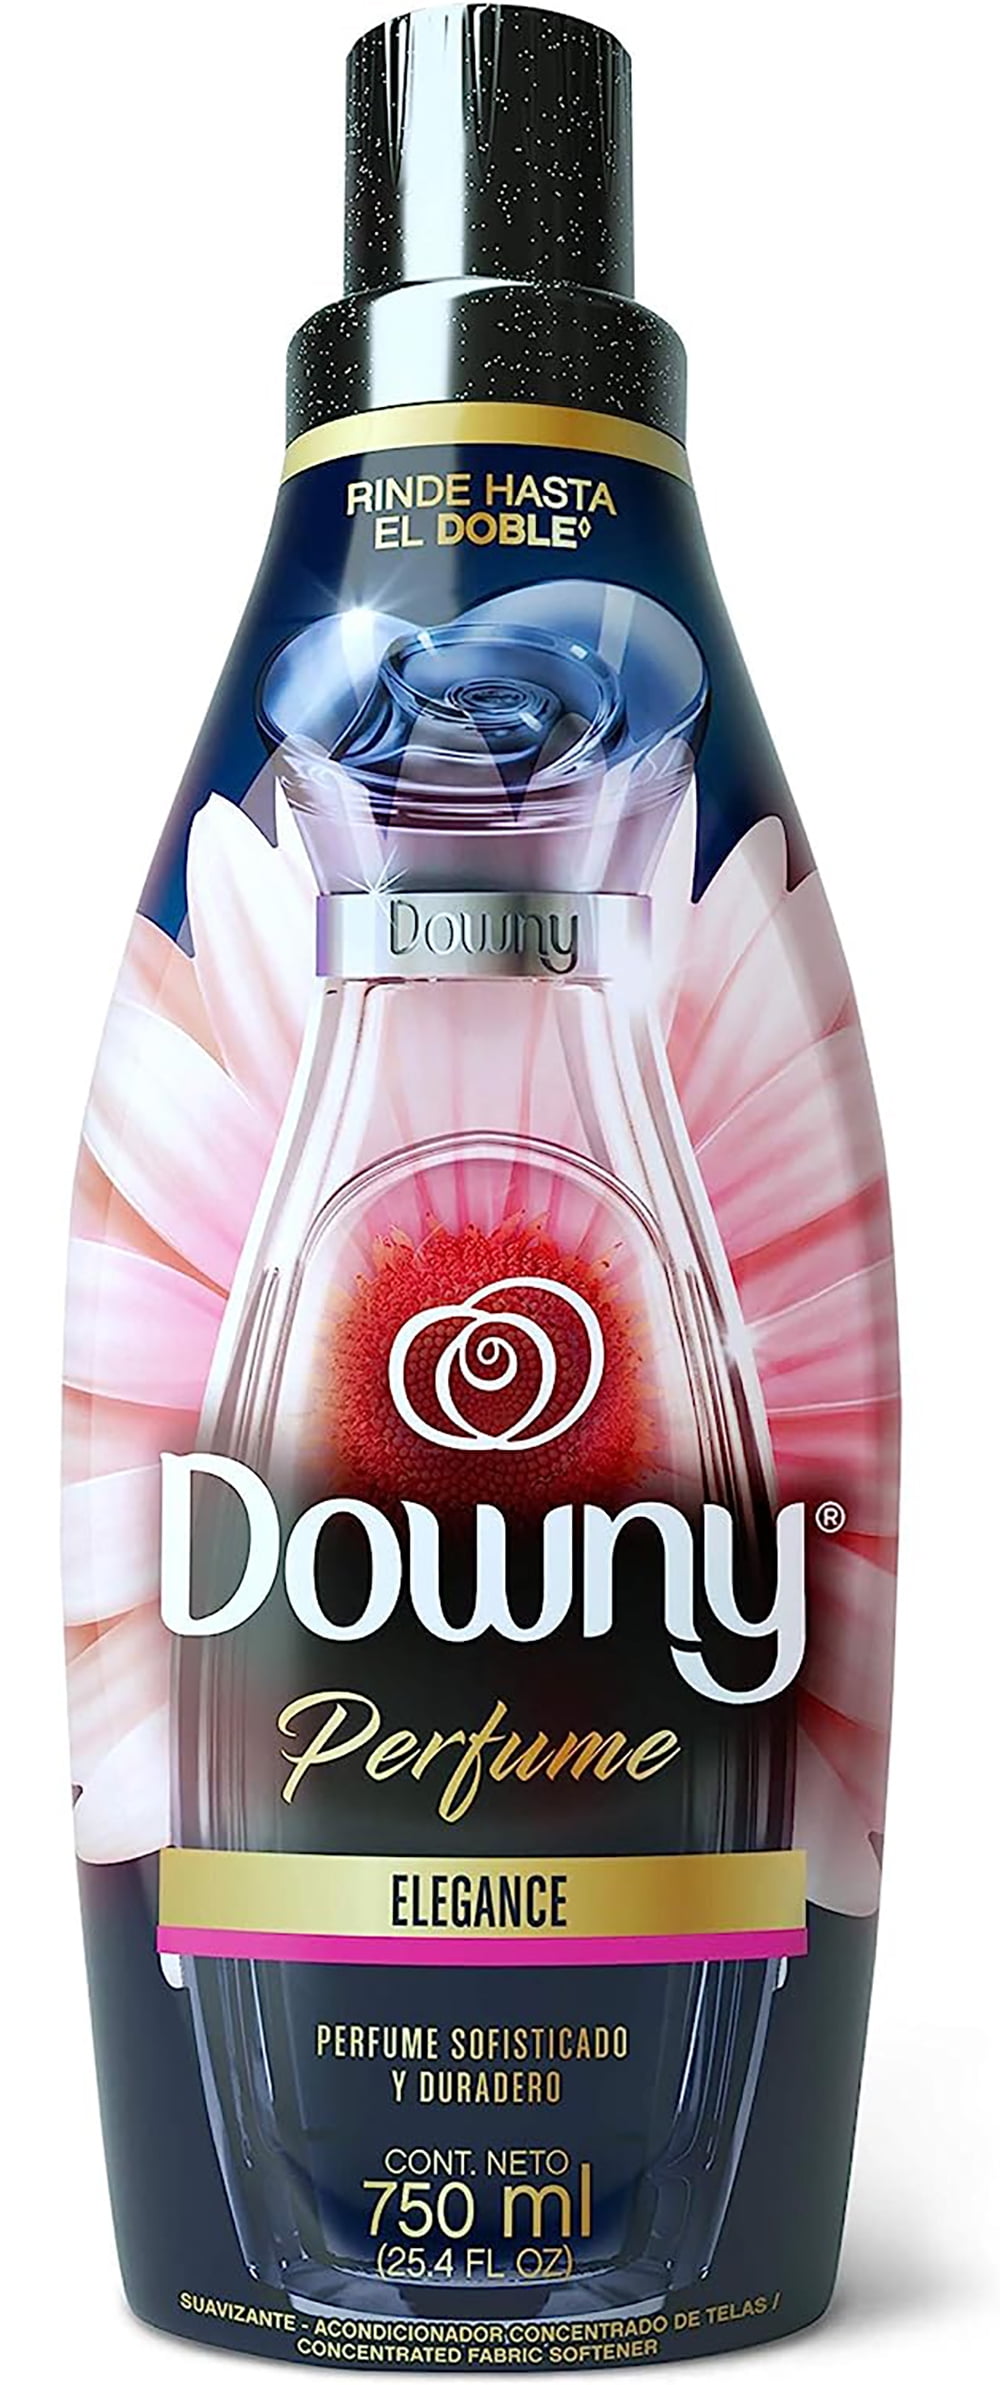 Comfort Luxury Nature Concentrated Fabric Softener, Elegance, 1.6